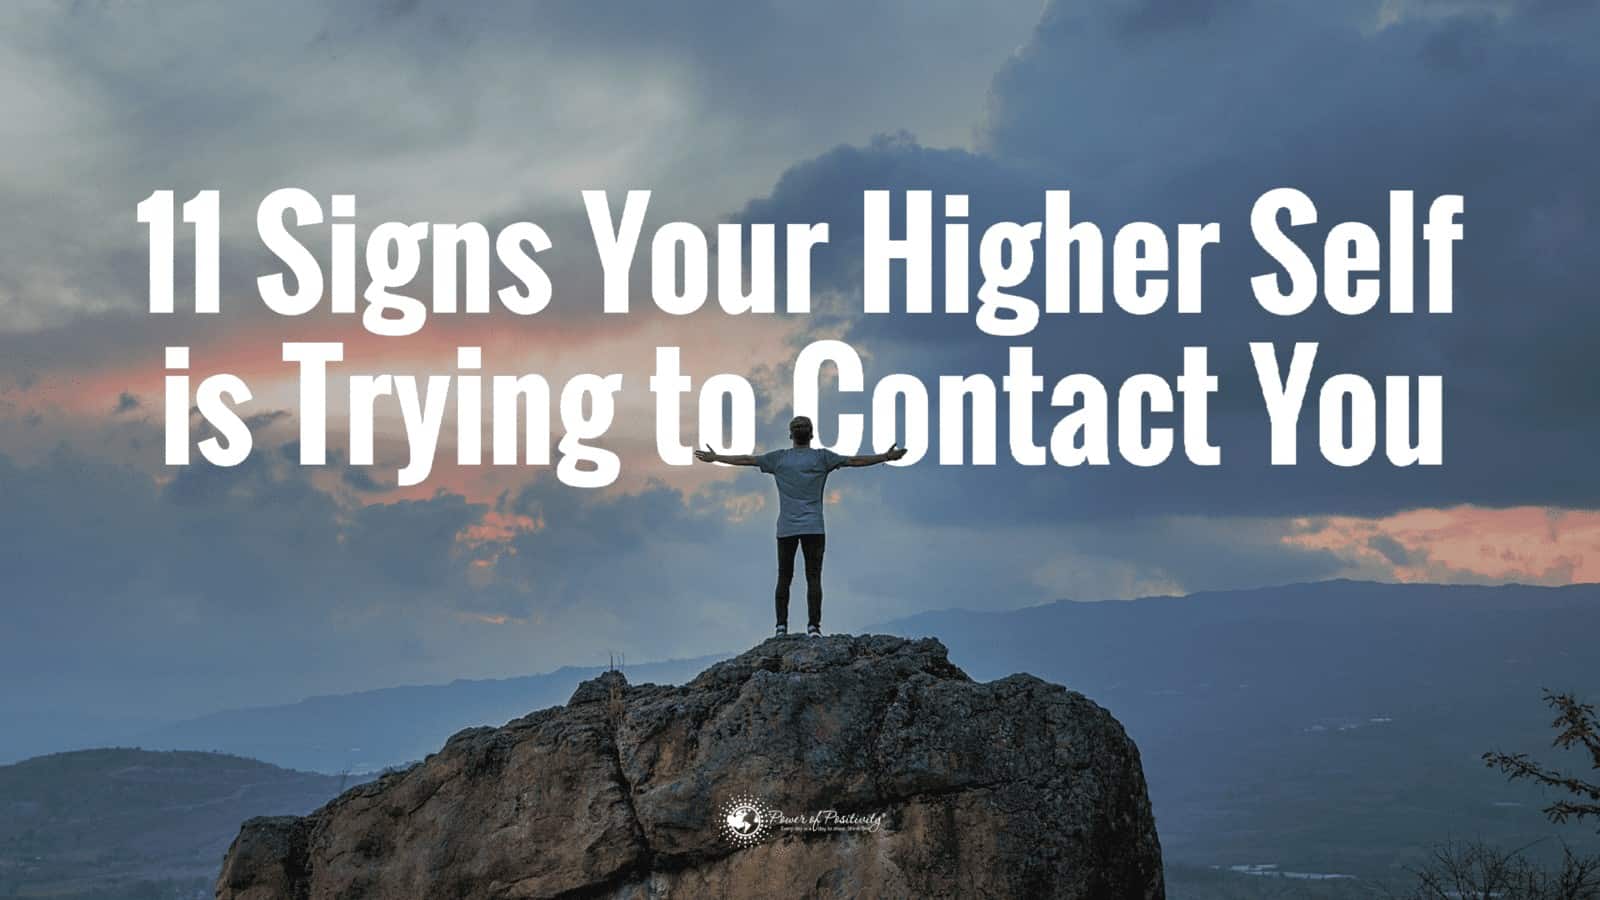 11 Signs Your Higher Self Is Trying To Contact You